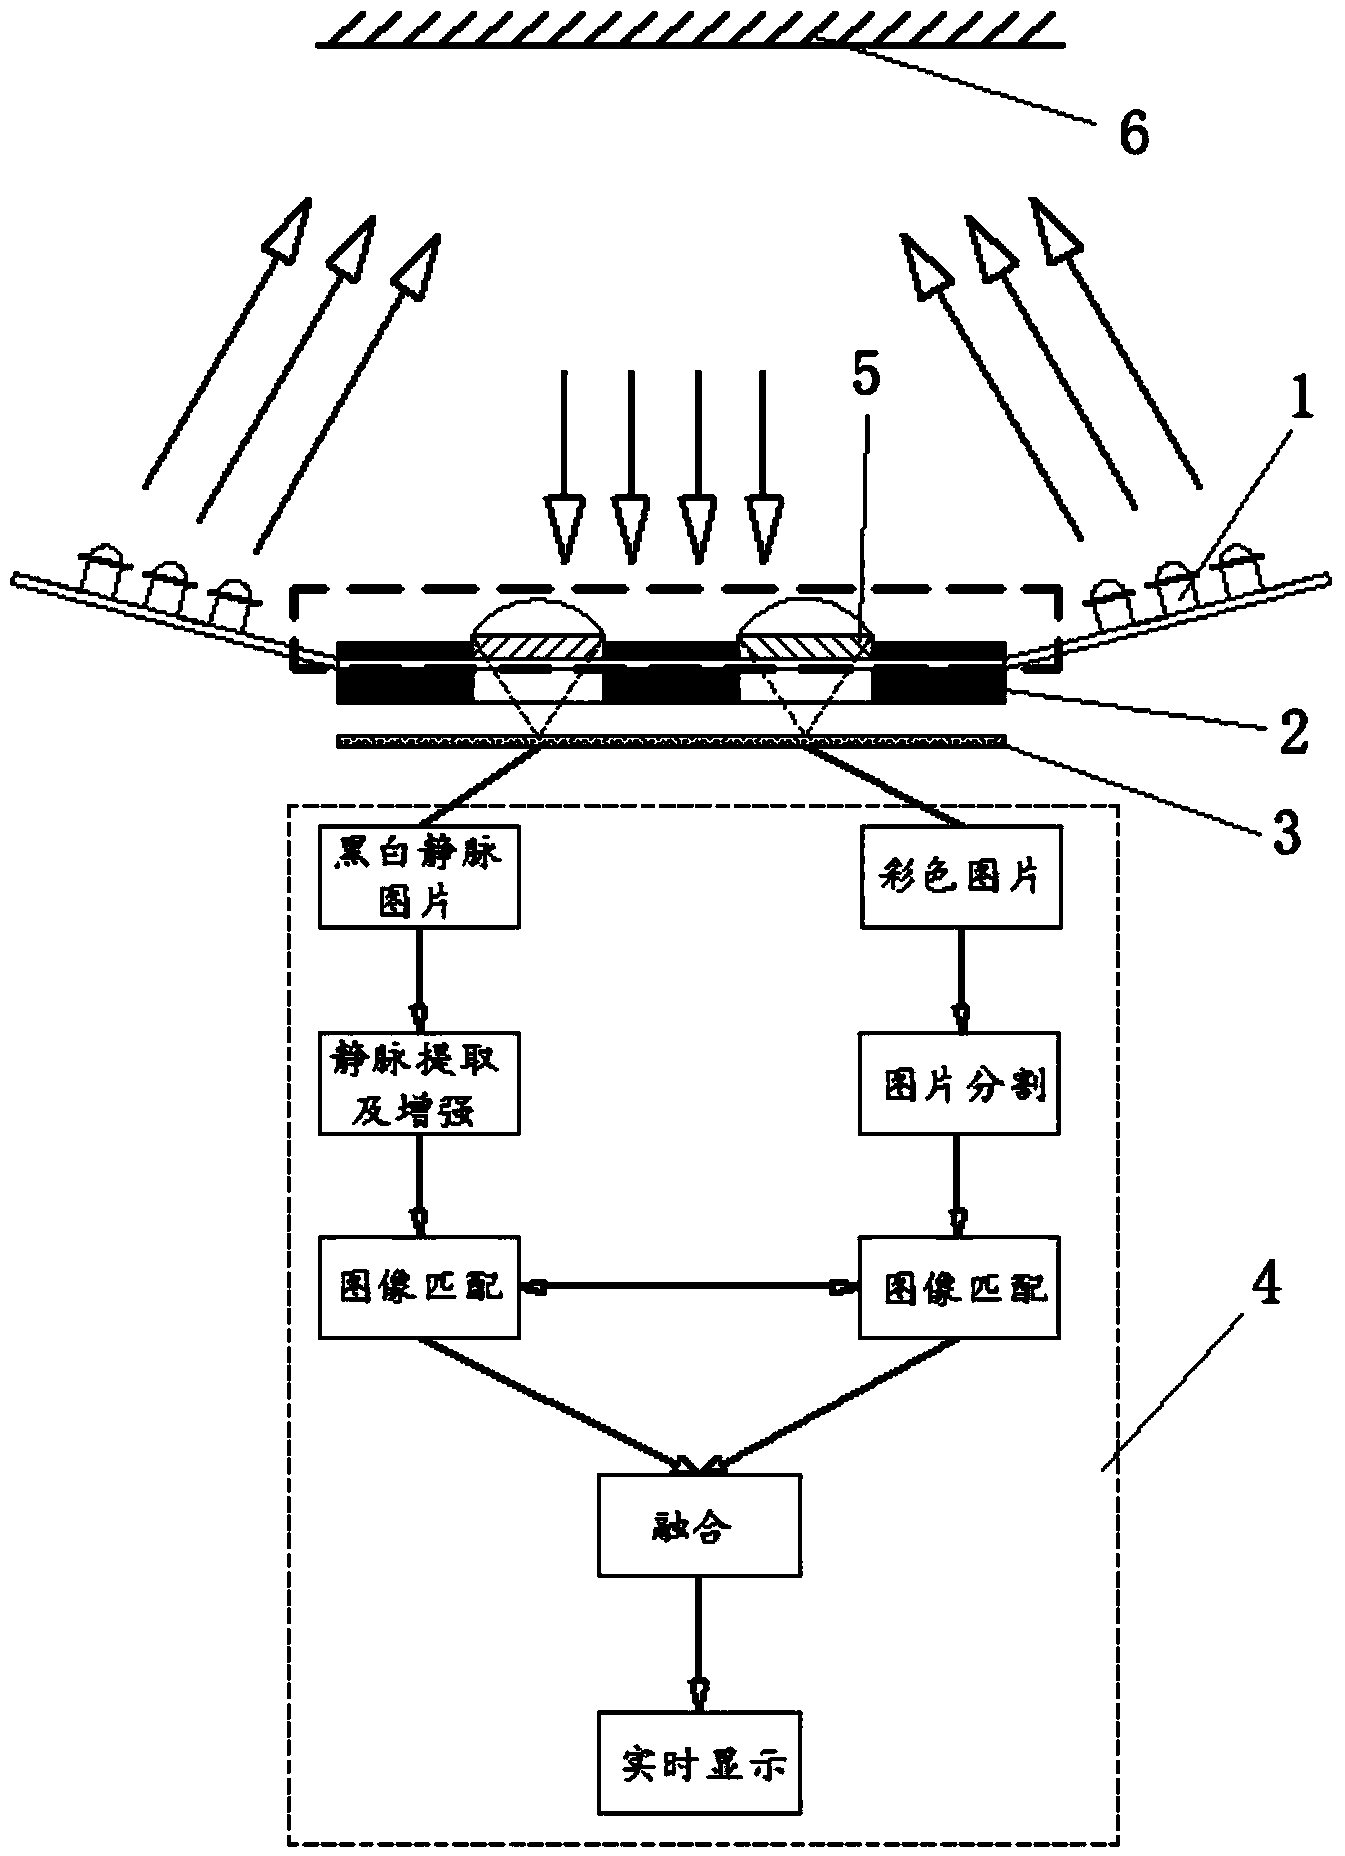 Method for manufacturing double-lens multi-spectral imaging lens set and vein display system thereof